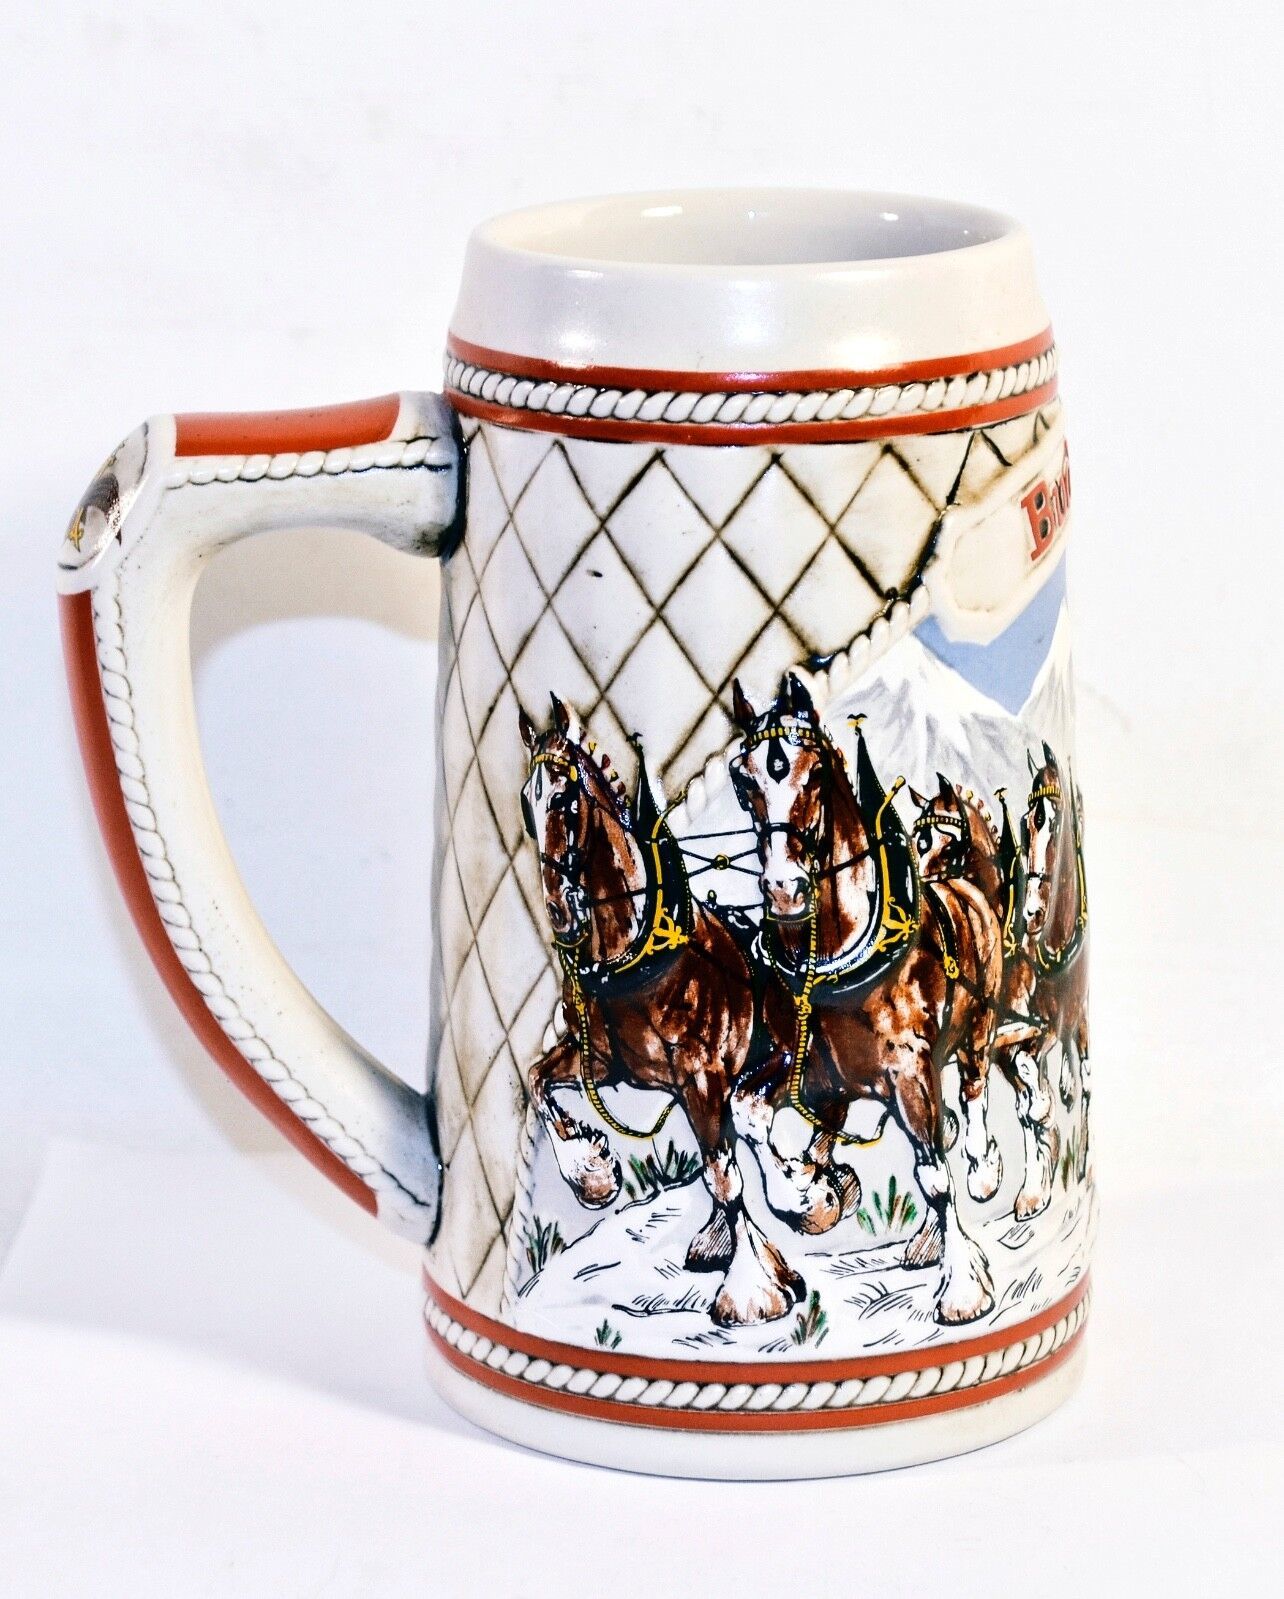 Primary image for Budweiser Holiday Stein Clydesdale Snow Capped Mountains Ceramarte Brazil 